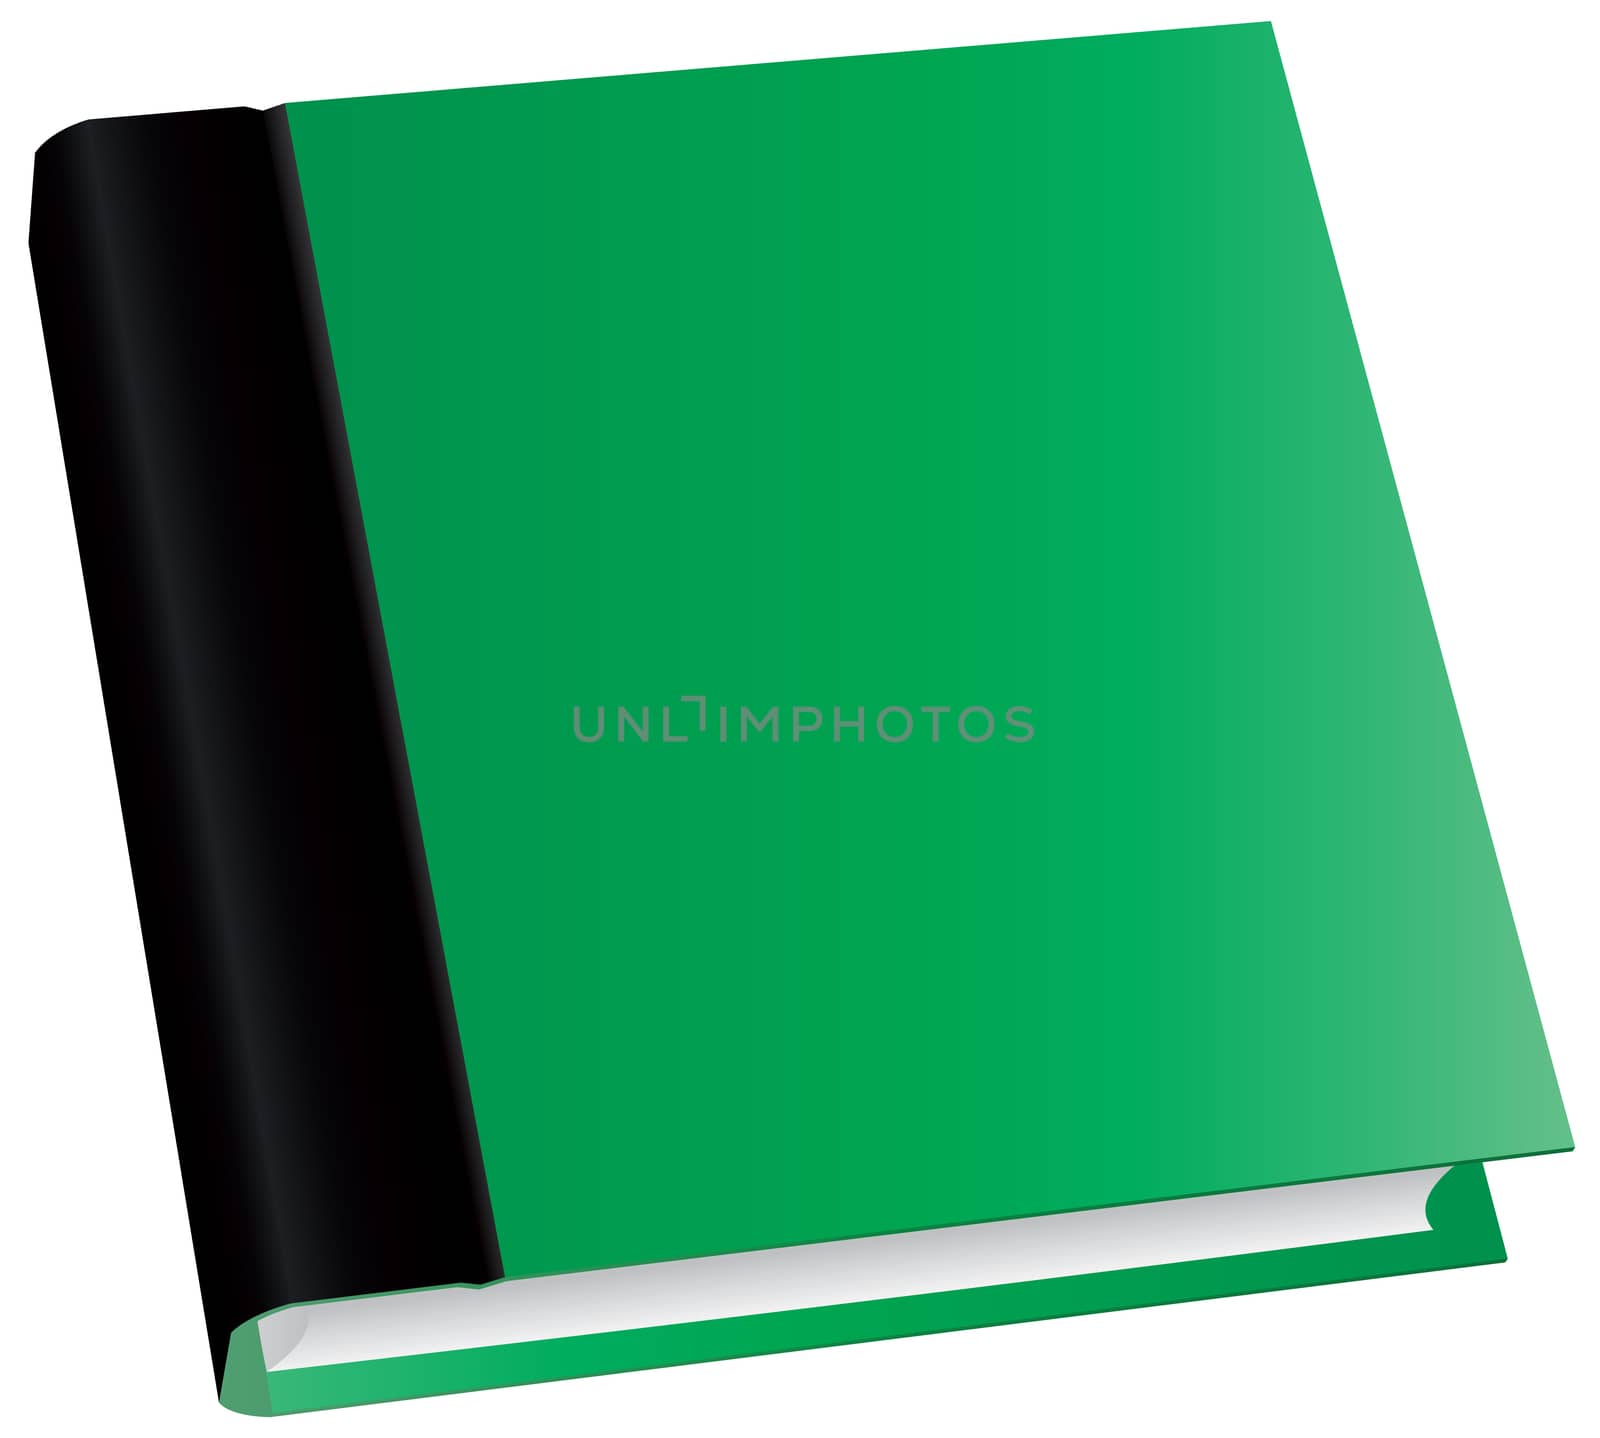 Illustration of classic green book in front view isolated on white background.